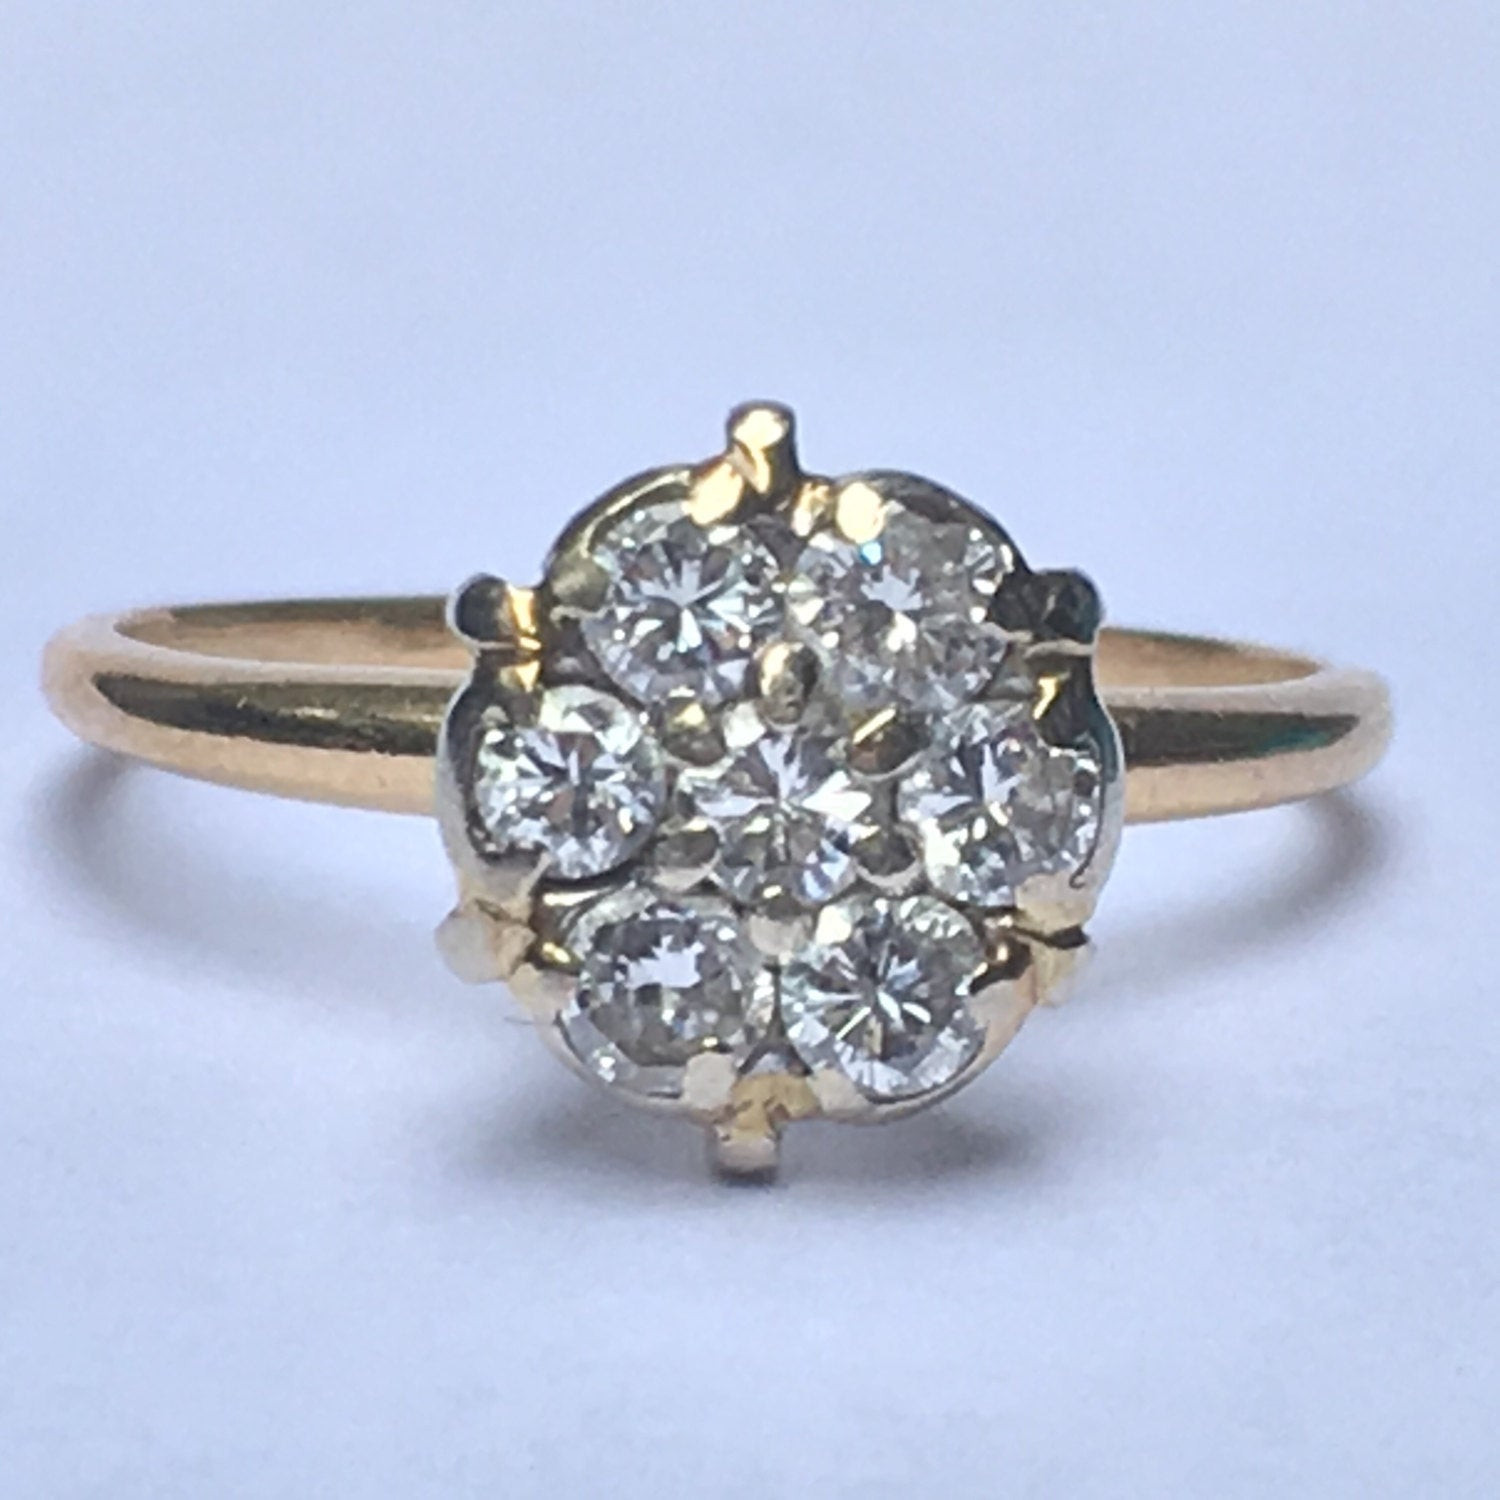 Cluster Diamond Rings
 Vintage Diamond Cluster Ring 14K Yellow Gold Floral Design